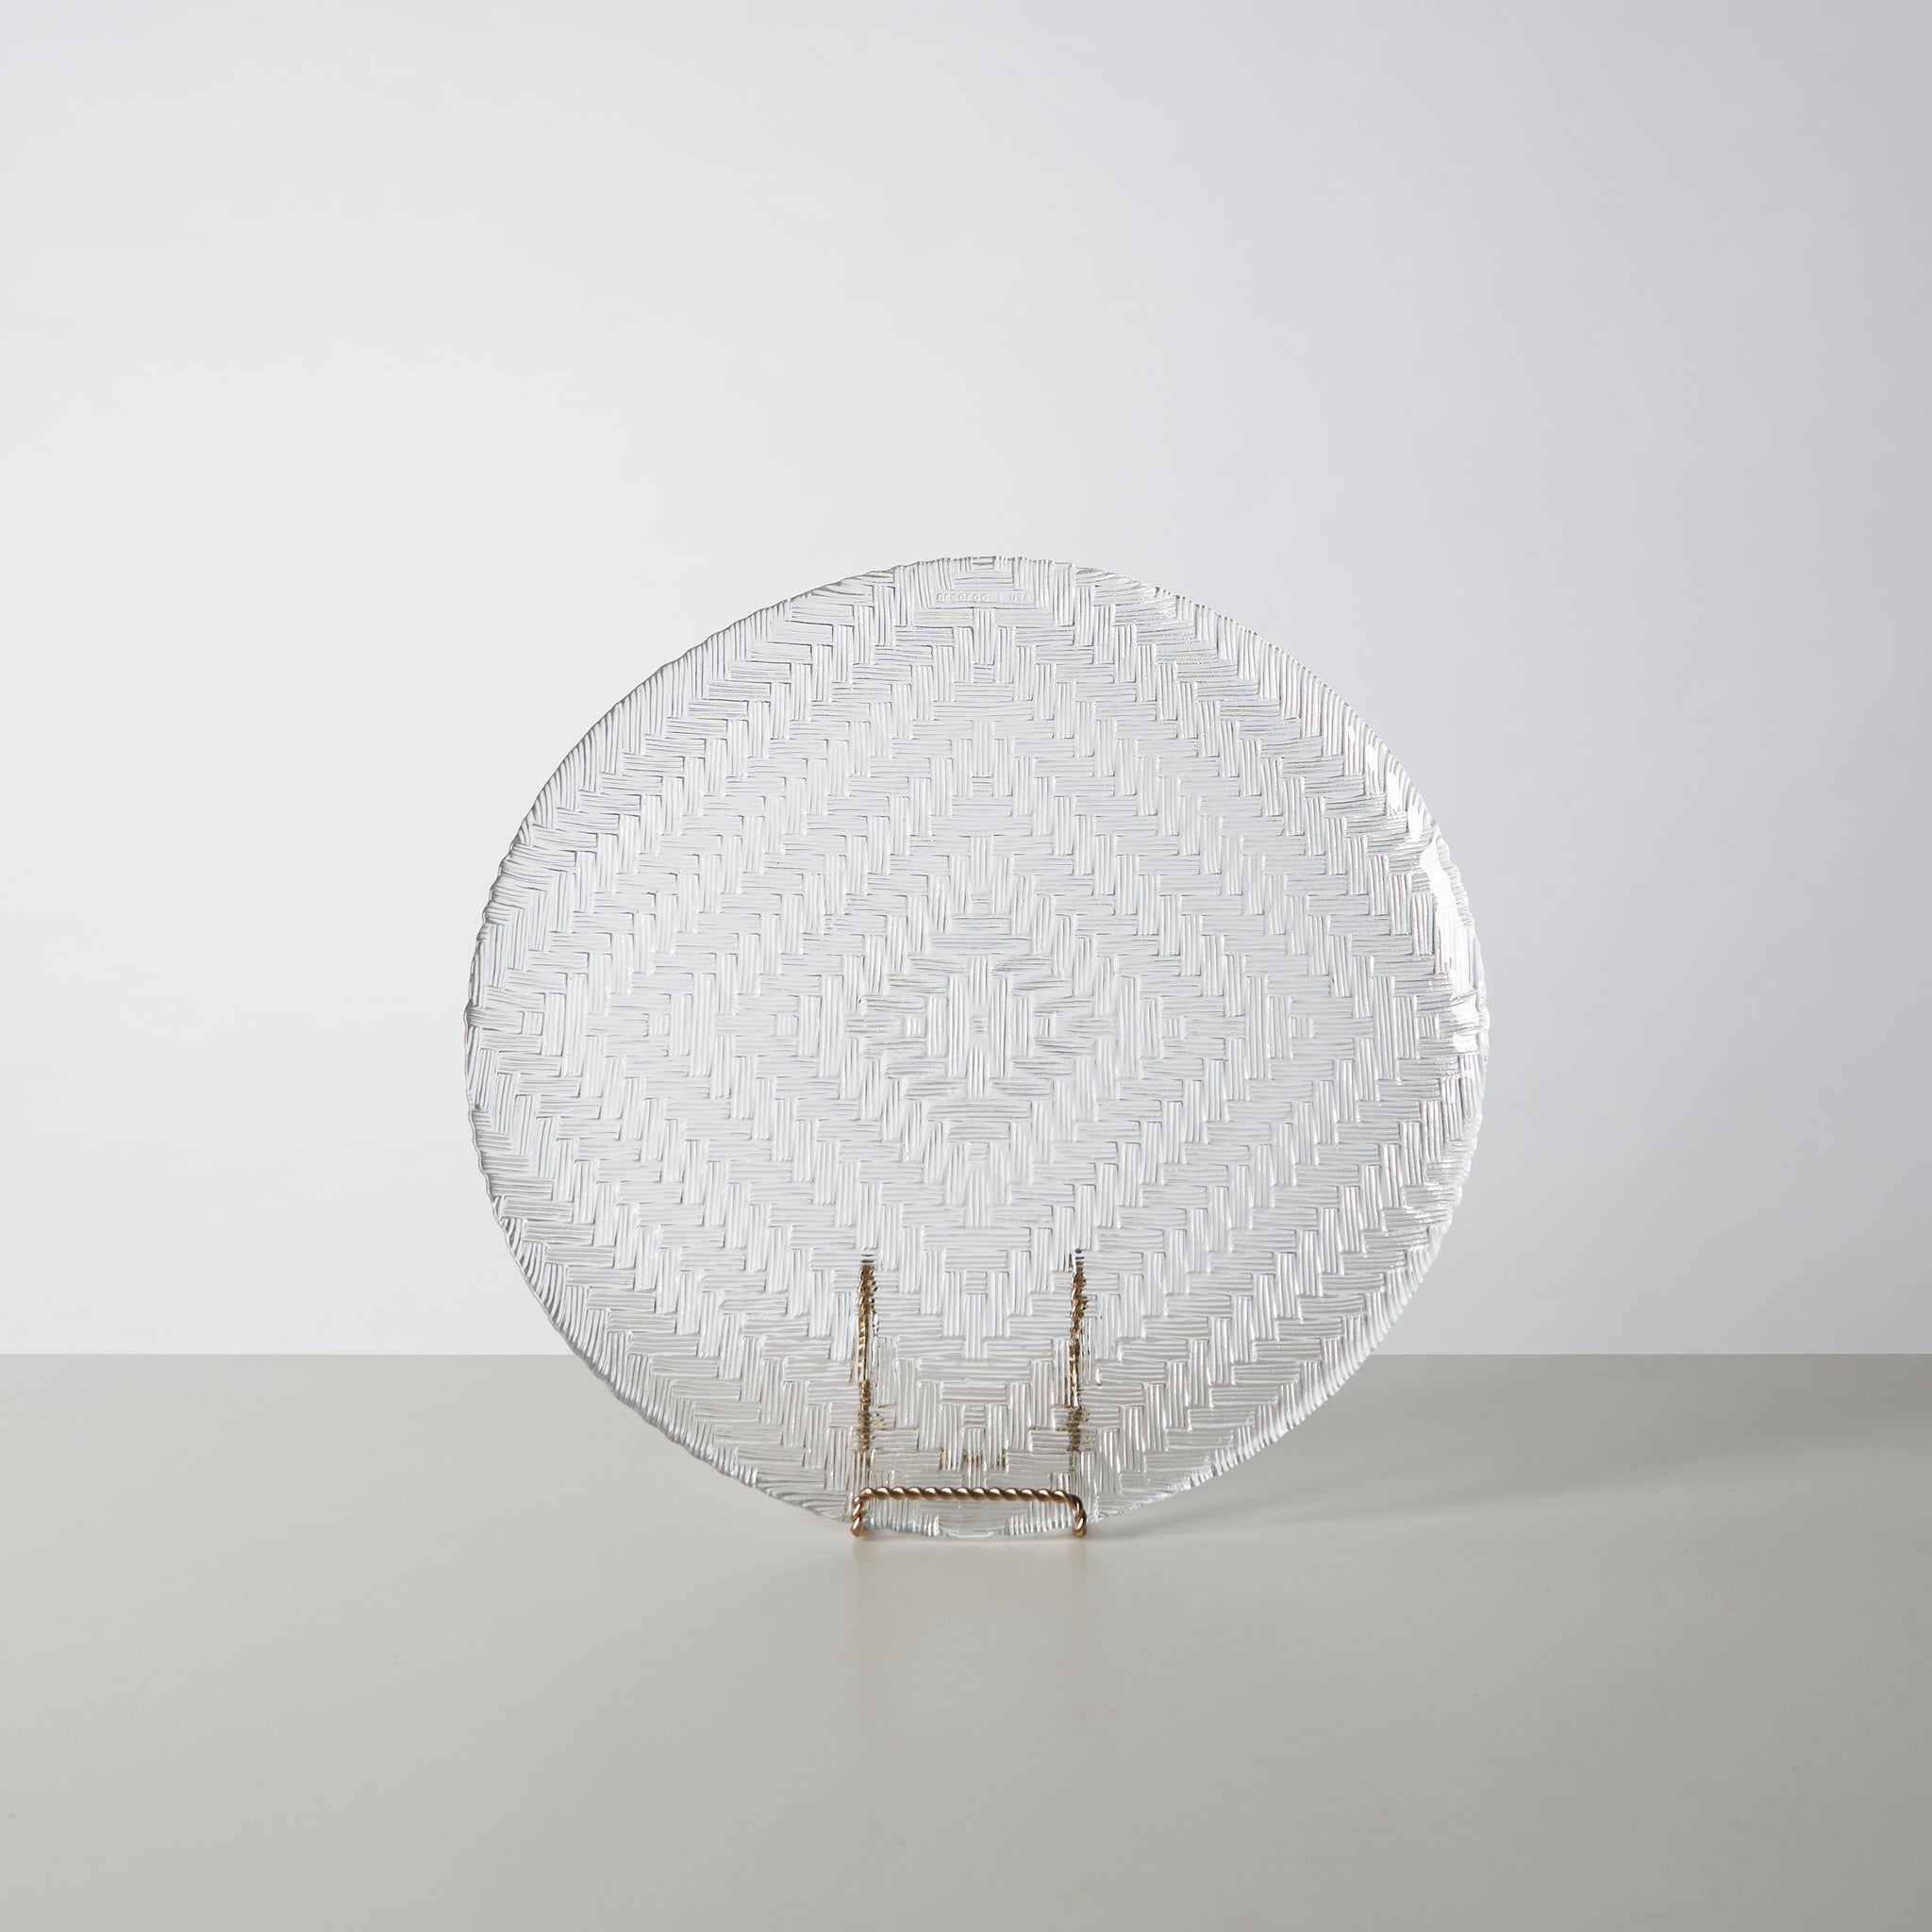 Vintage Textured Glass Plate by Arcoroc